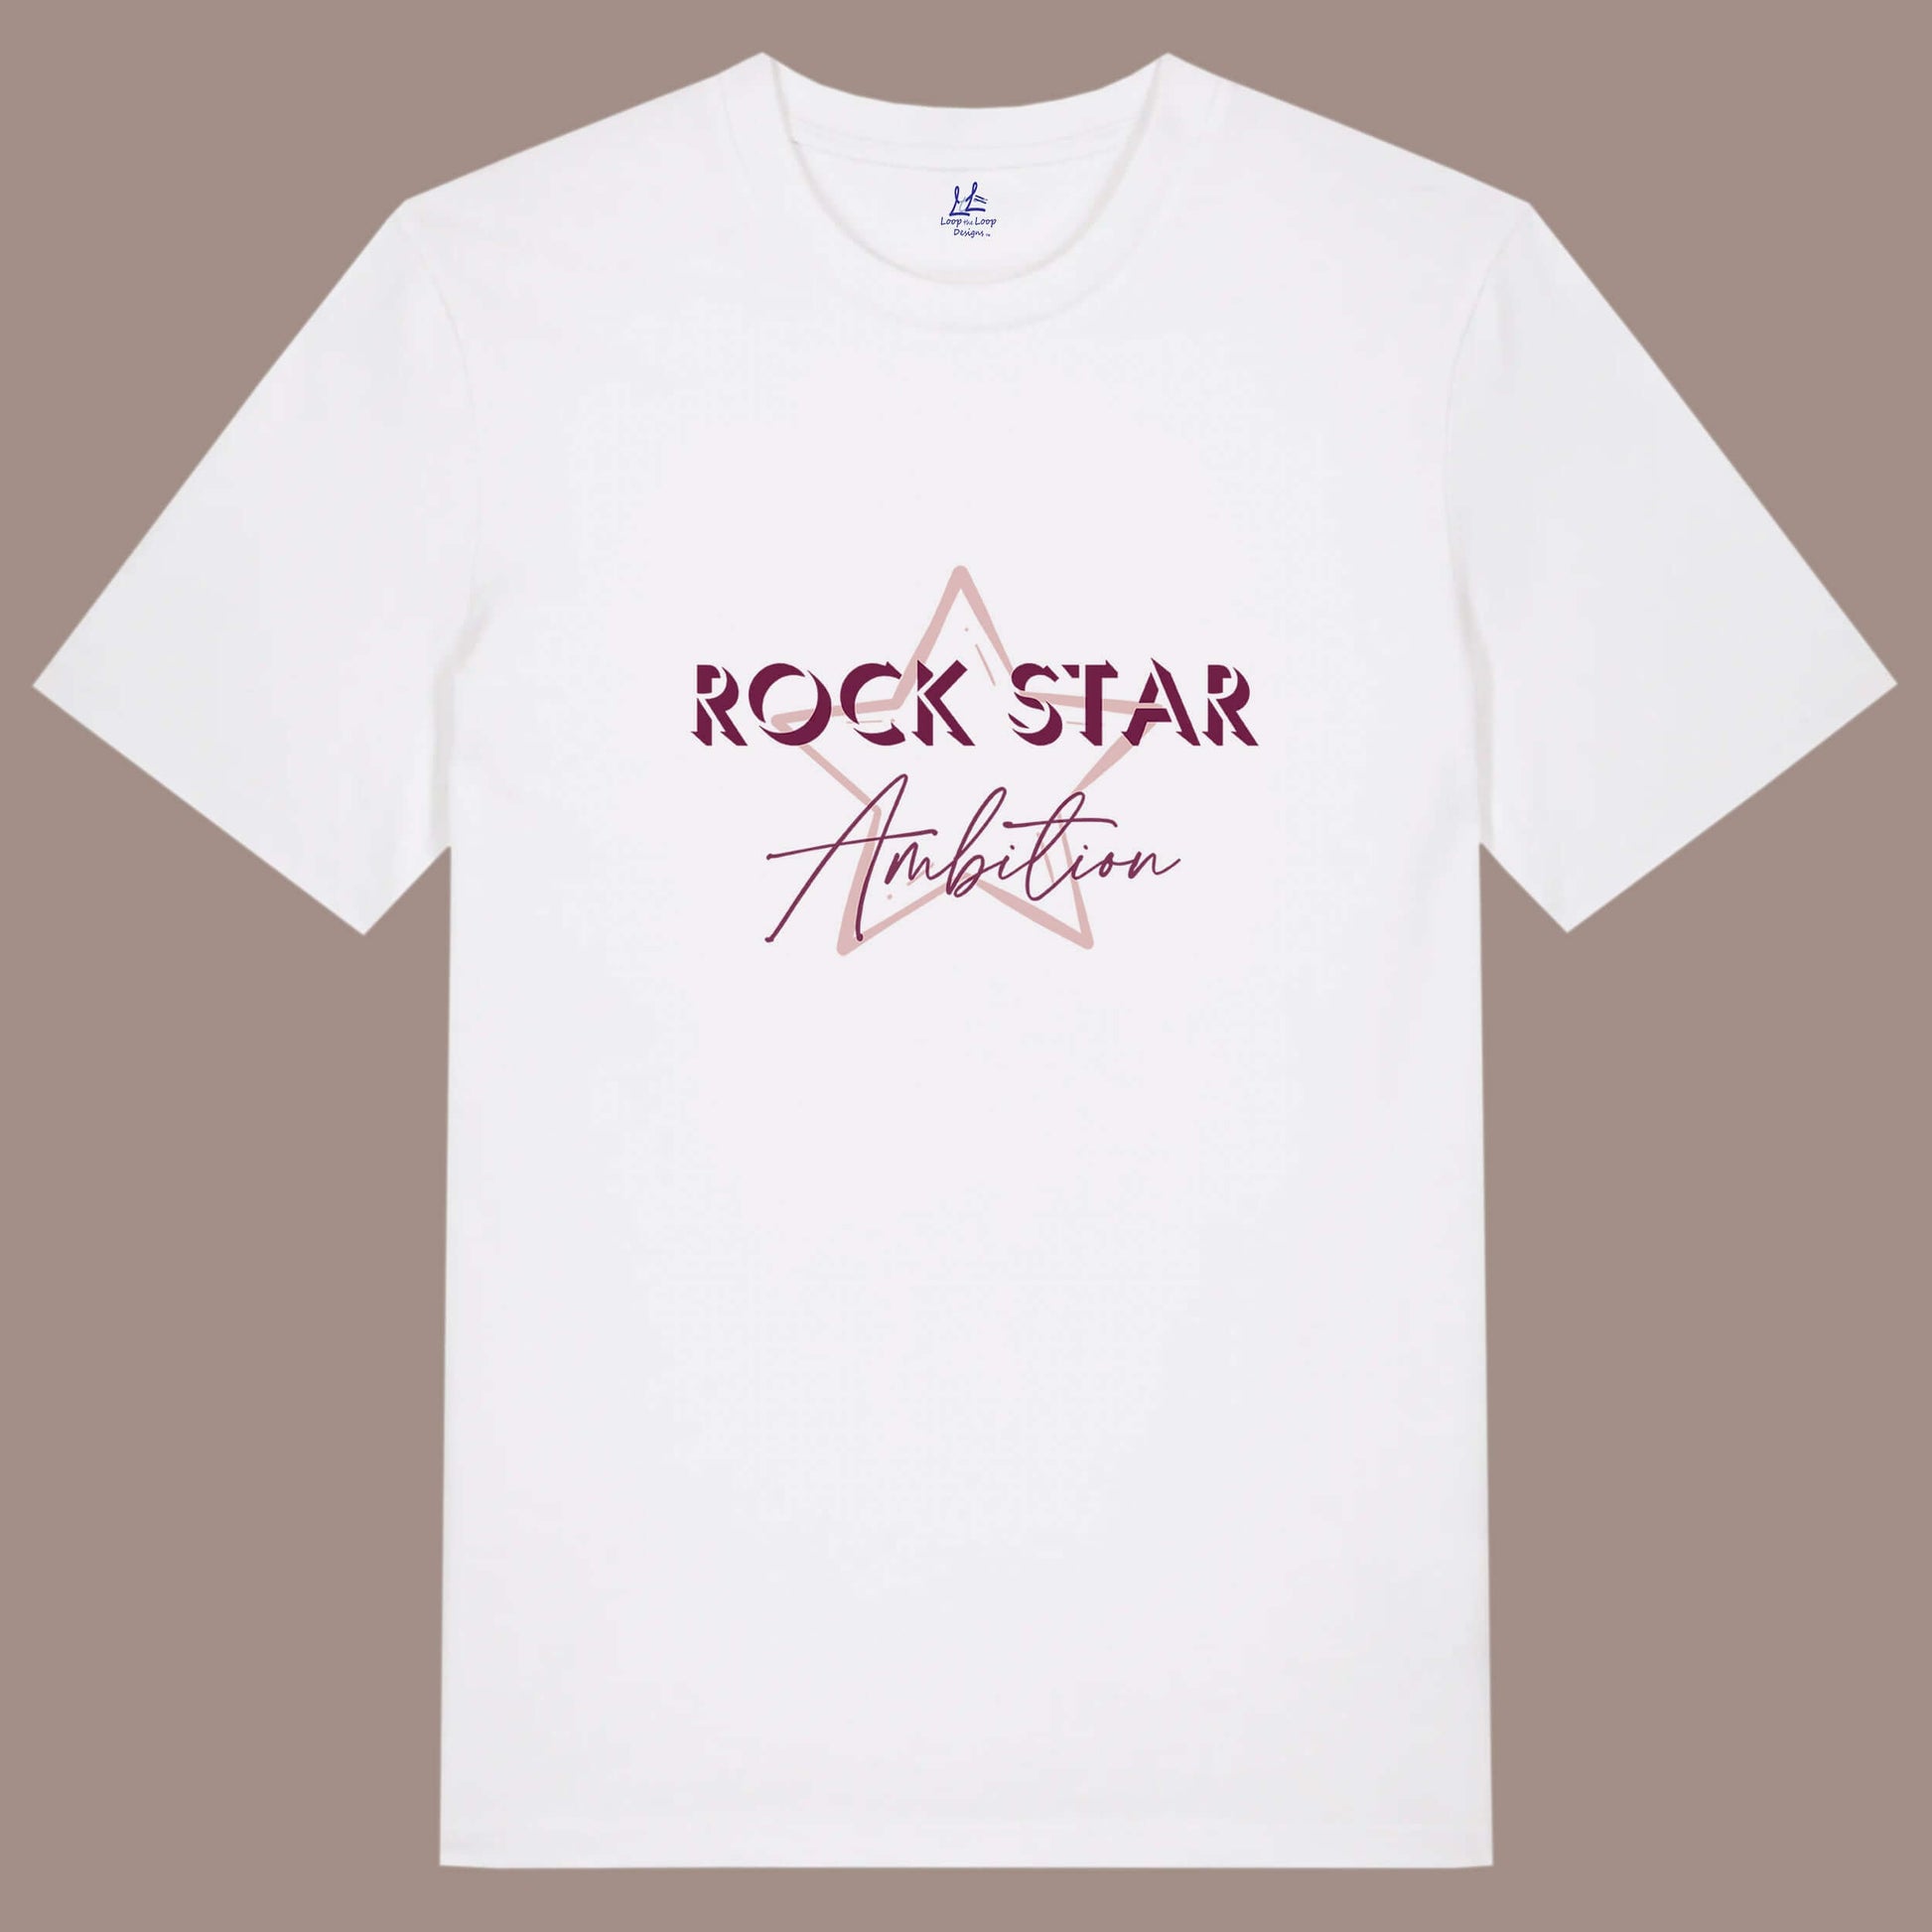 Organic cotton relaxed fit t shirt. Men's white short sleeve graphic tshirt. Crew neck casual wear. Band Tee Design is pale peach star outline behind wording ROCK STAR in upper case shadowed  dark red text, then Ambition below in dark red script font. Music themed unisex essentials top